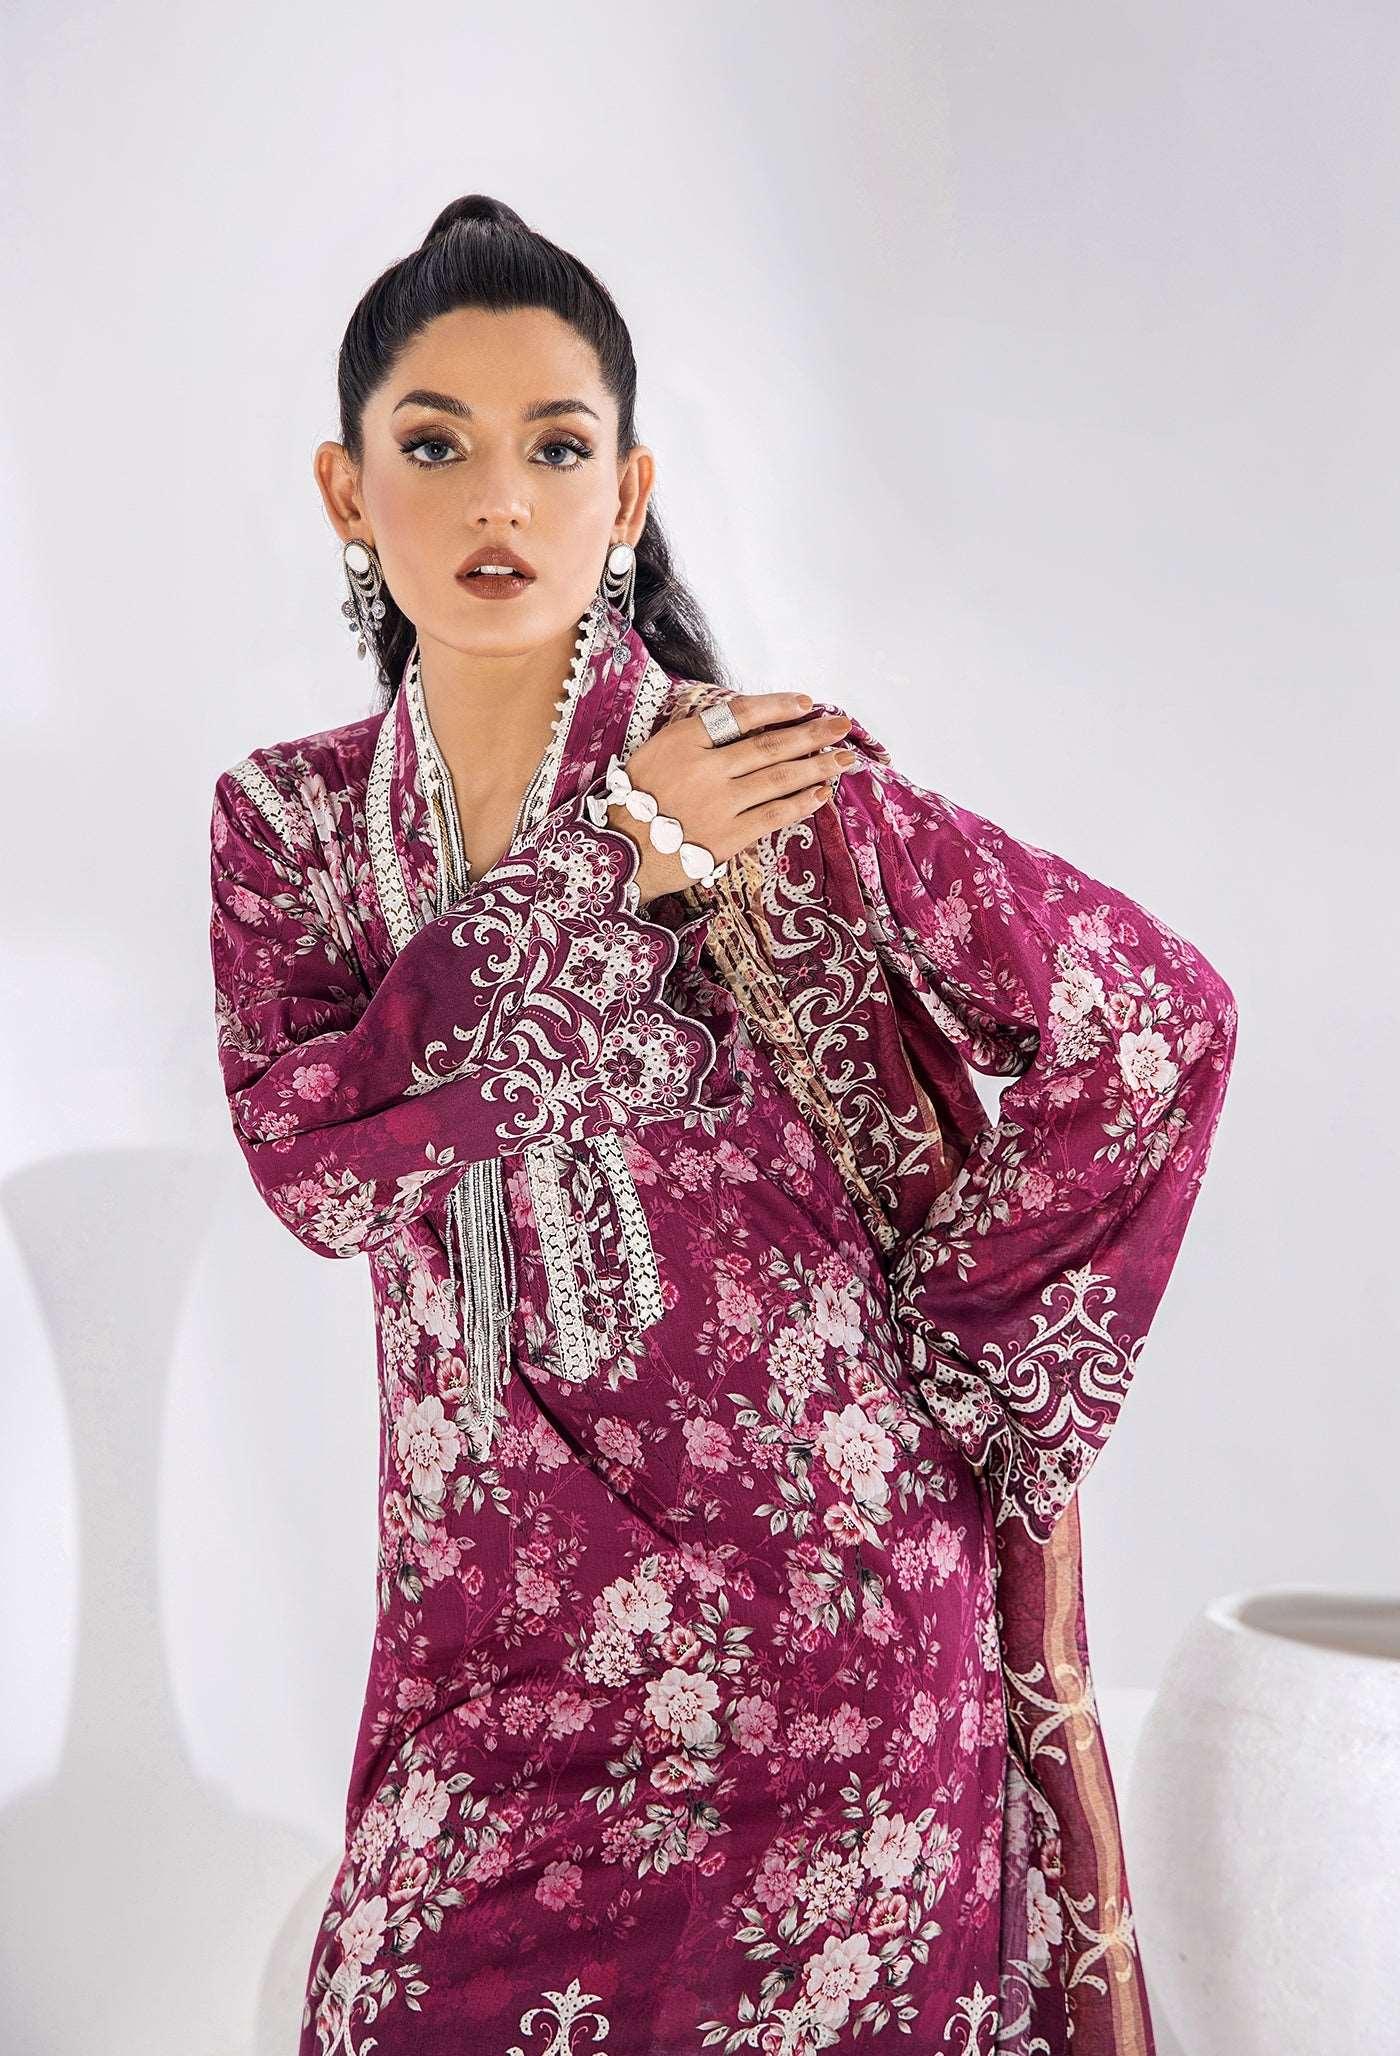 Innara Unstitched Lawn Collection by Adan's Libas (5666)